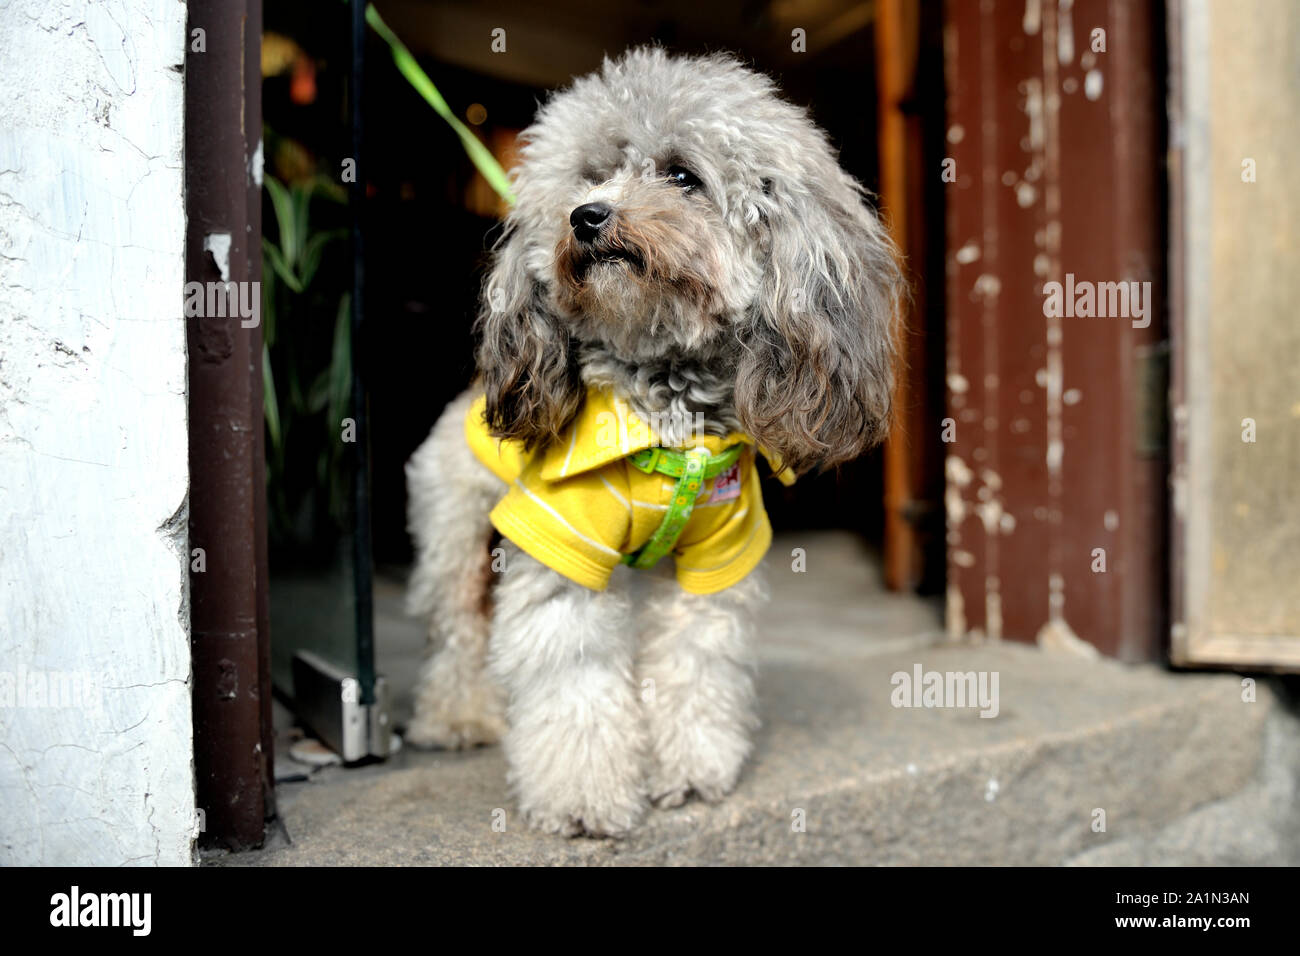 A small dog, dressed with a yellow cloth is standing in the entry of a house and looks sweetly (Suzhou, old town, China). Stock Photo